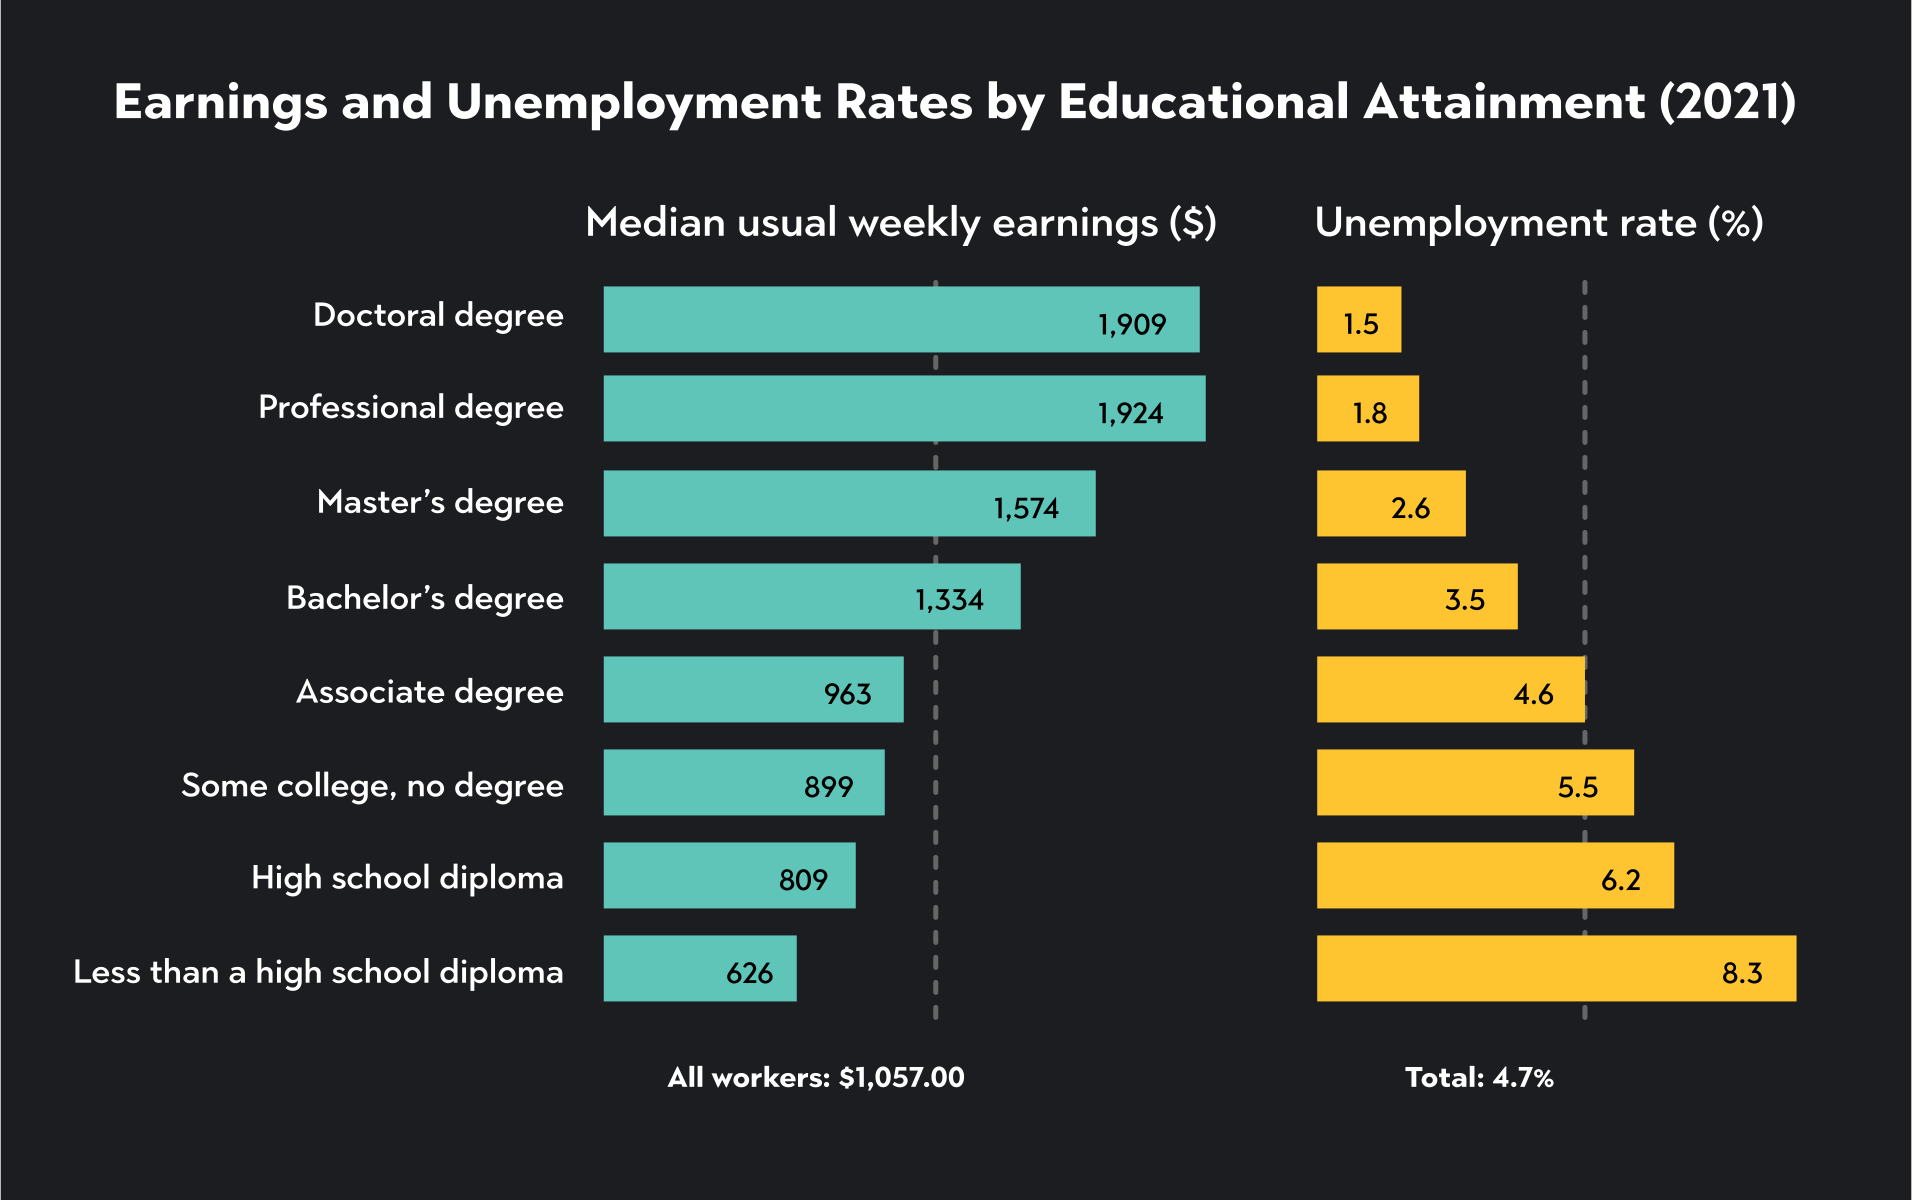 Graphic showing Earnings and unemployment rates by educational attainment in 2021